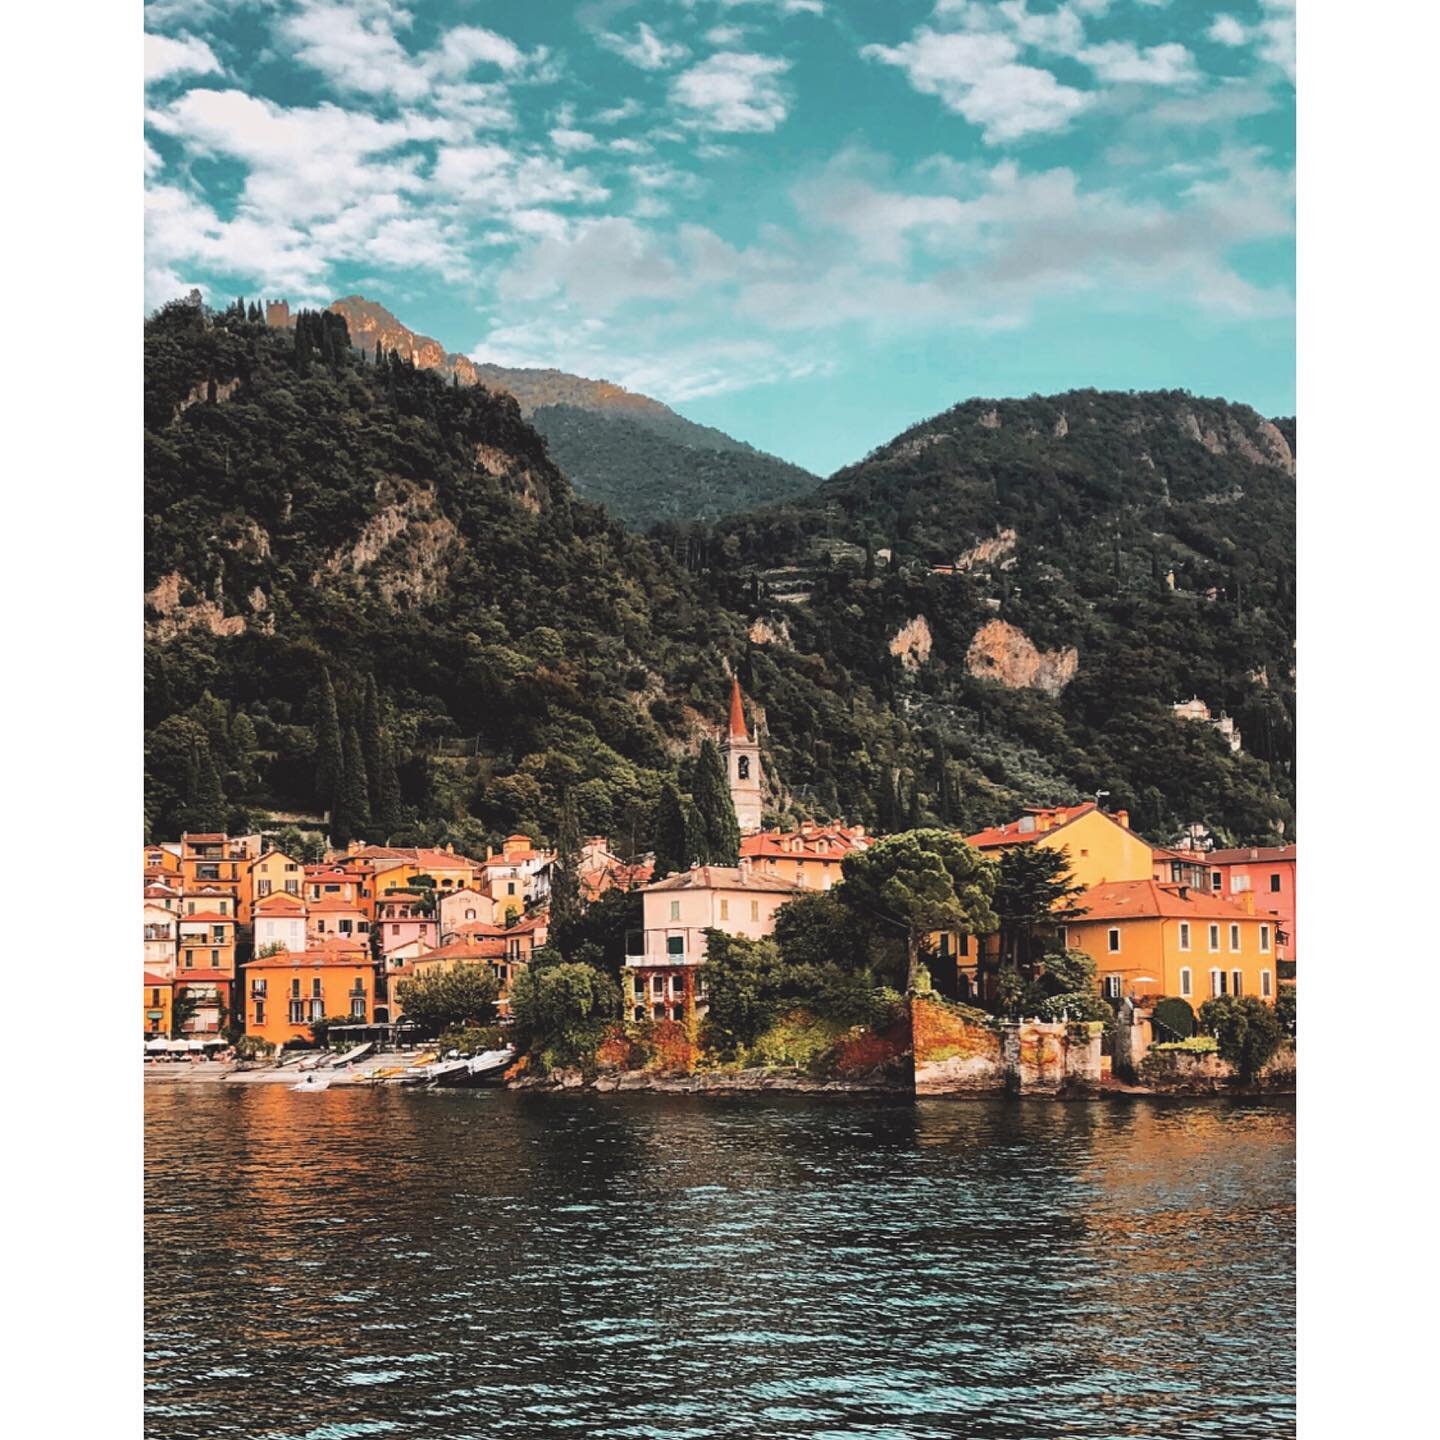 Only one room left! Join us for this luxury yoga and creativity retreat for ultimate summer la dolce vita!

/ / / / /

LAKE COMO, ITALY \ YOGA+CREATIVITY \ JUL 9-14, 2023

/ / / / /

#dogoodtravelwell #yoga #yogaretreat #mindfulness #mindfultravel #m